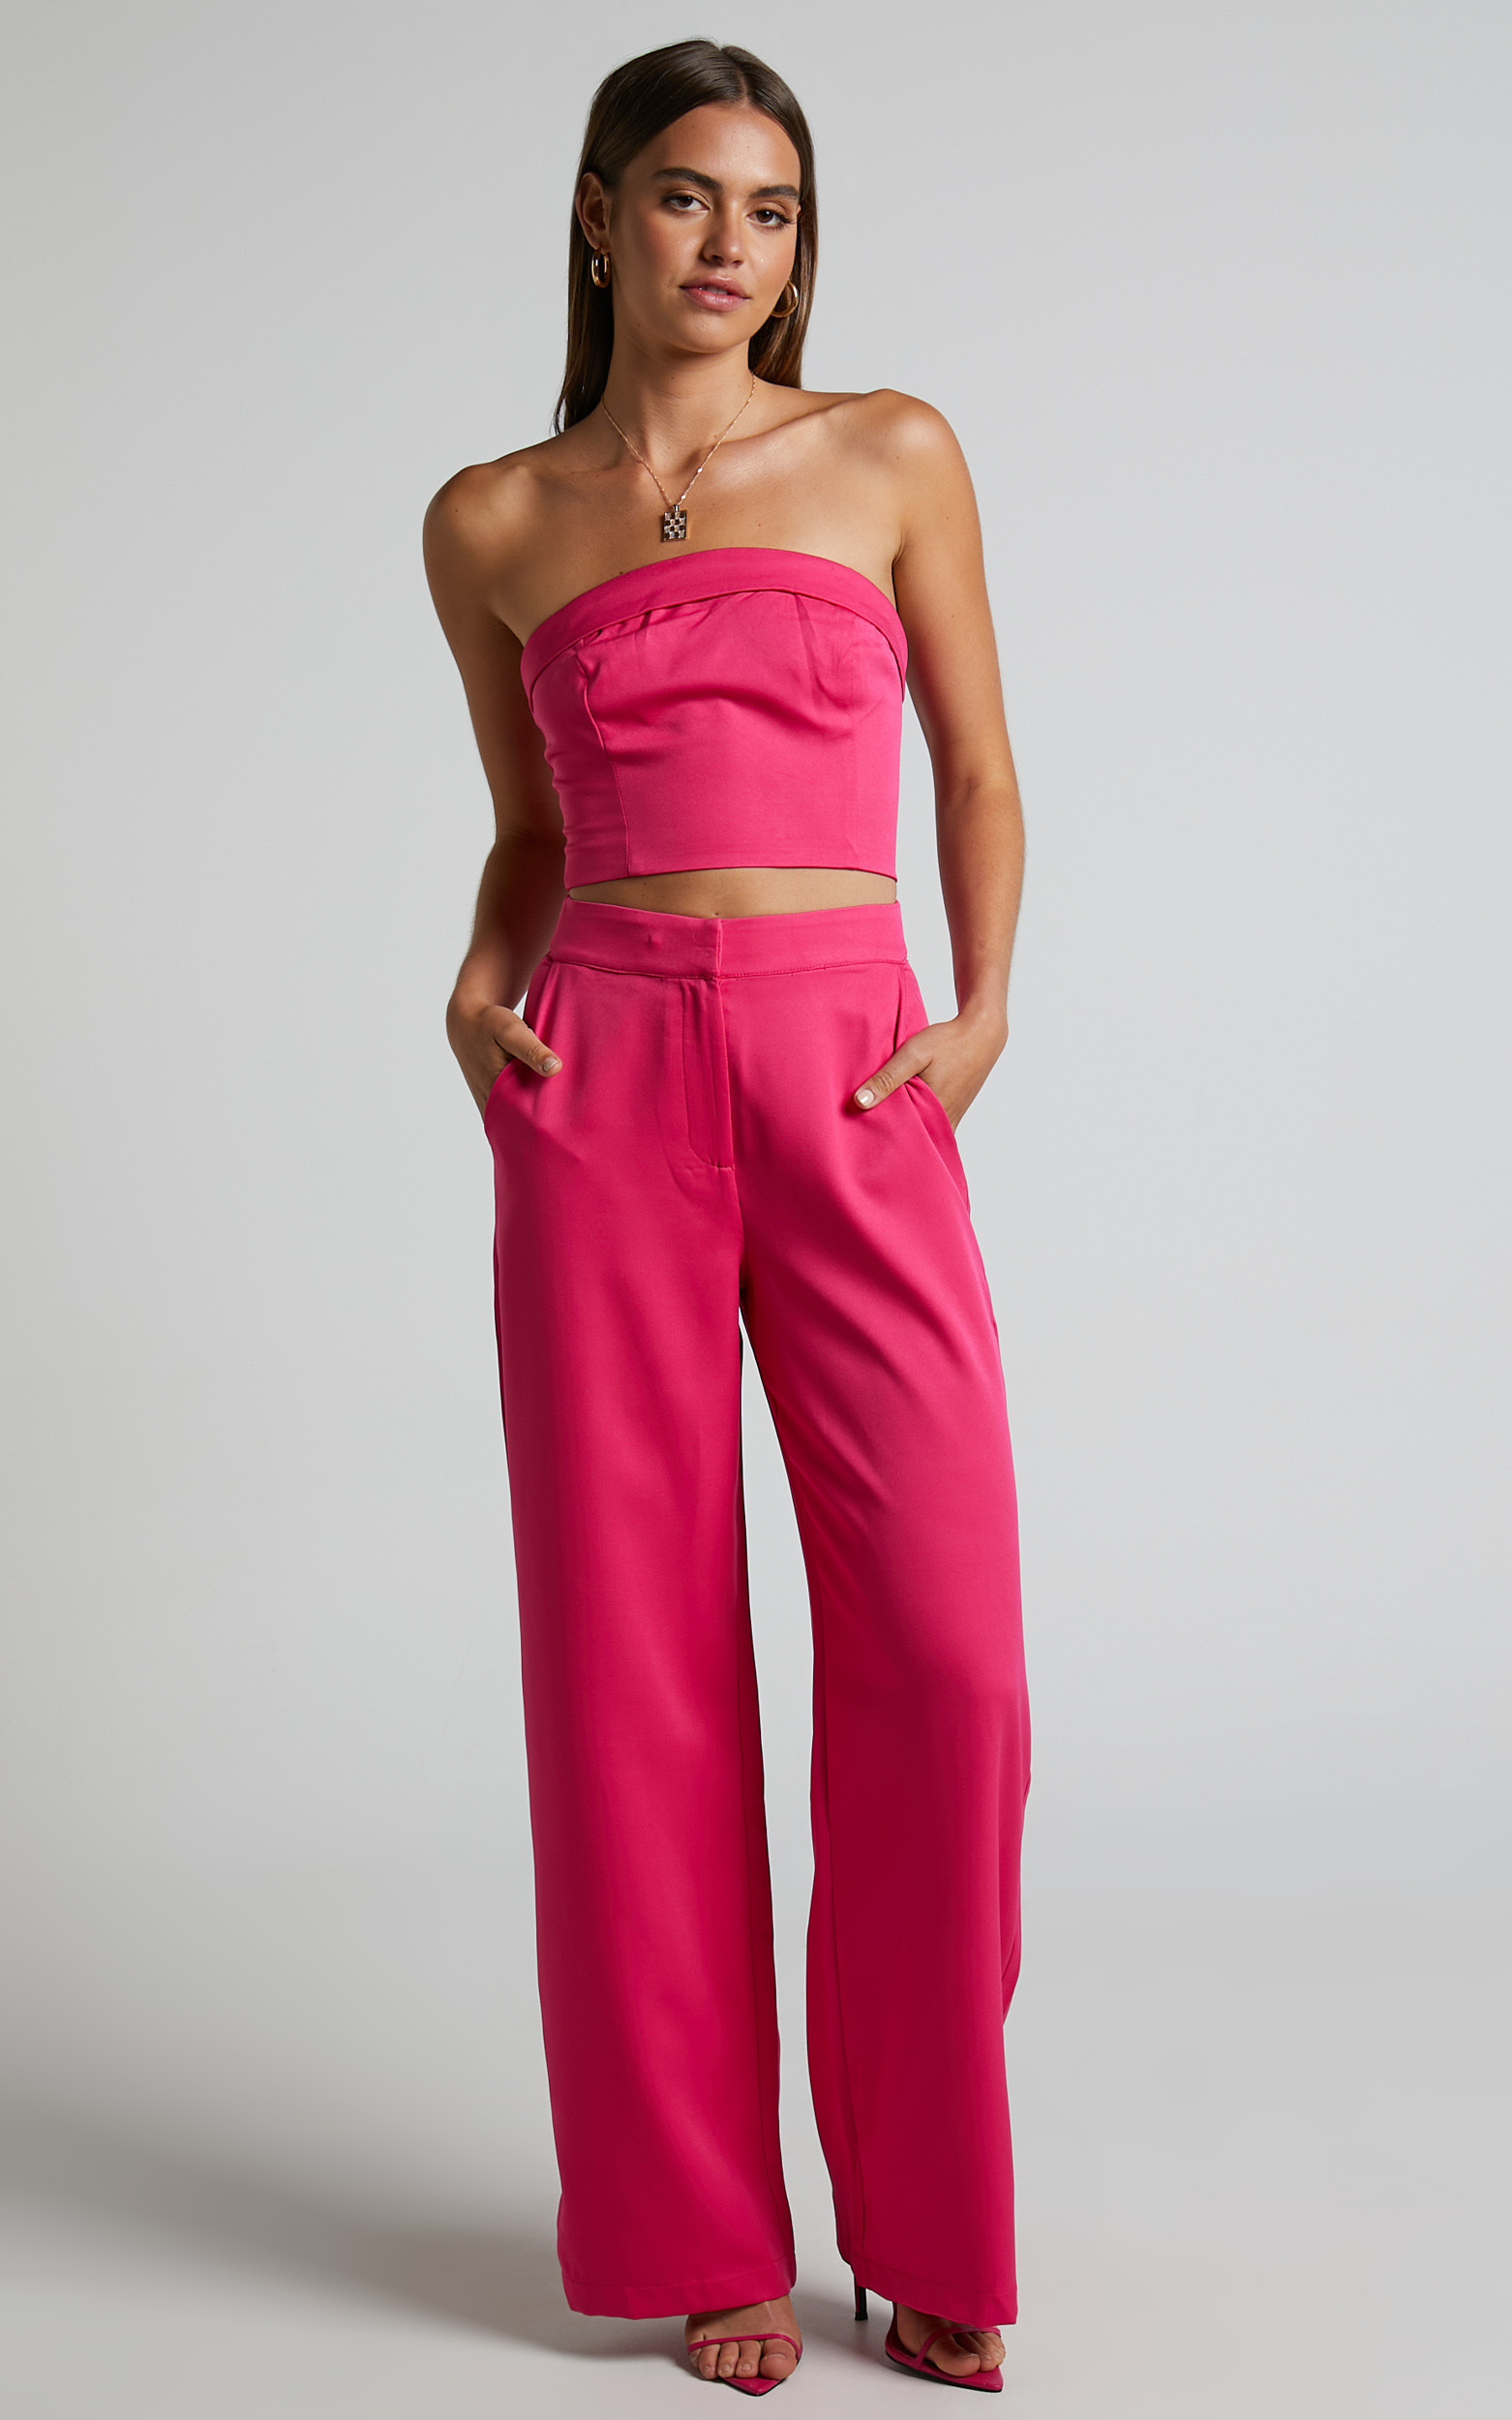 Silvia Two Piece Set - Foldover Top and Wide Leg Pant in Hot Pink - 04, PNK1, hi-res image number null